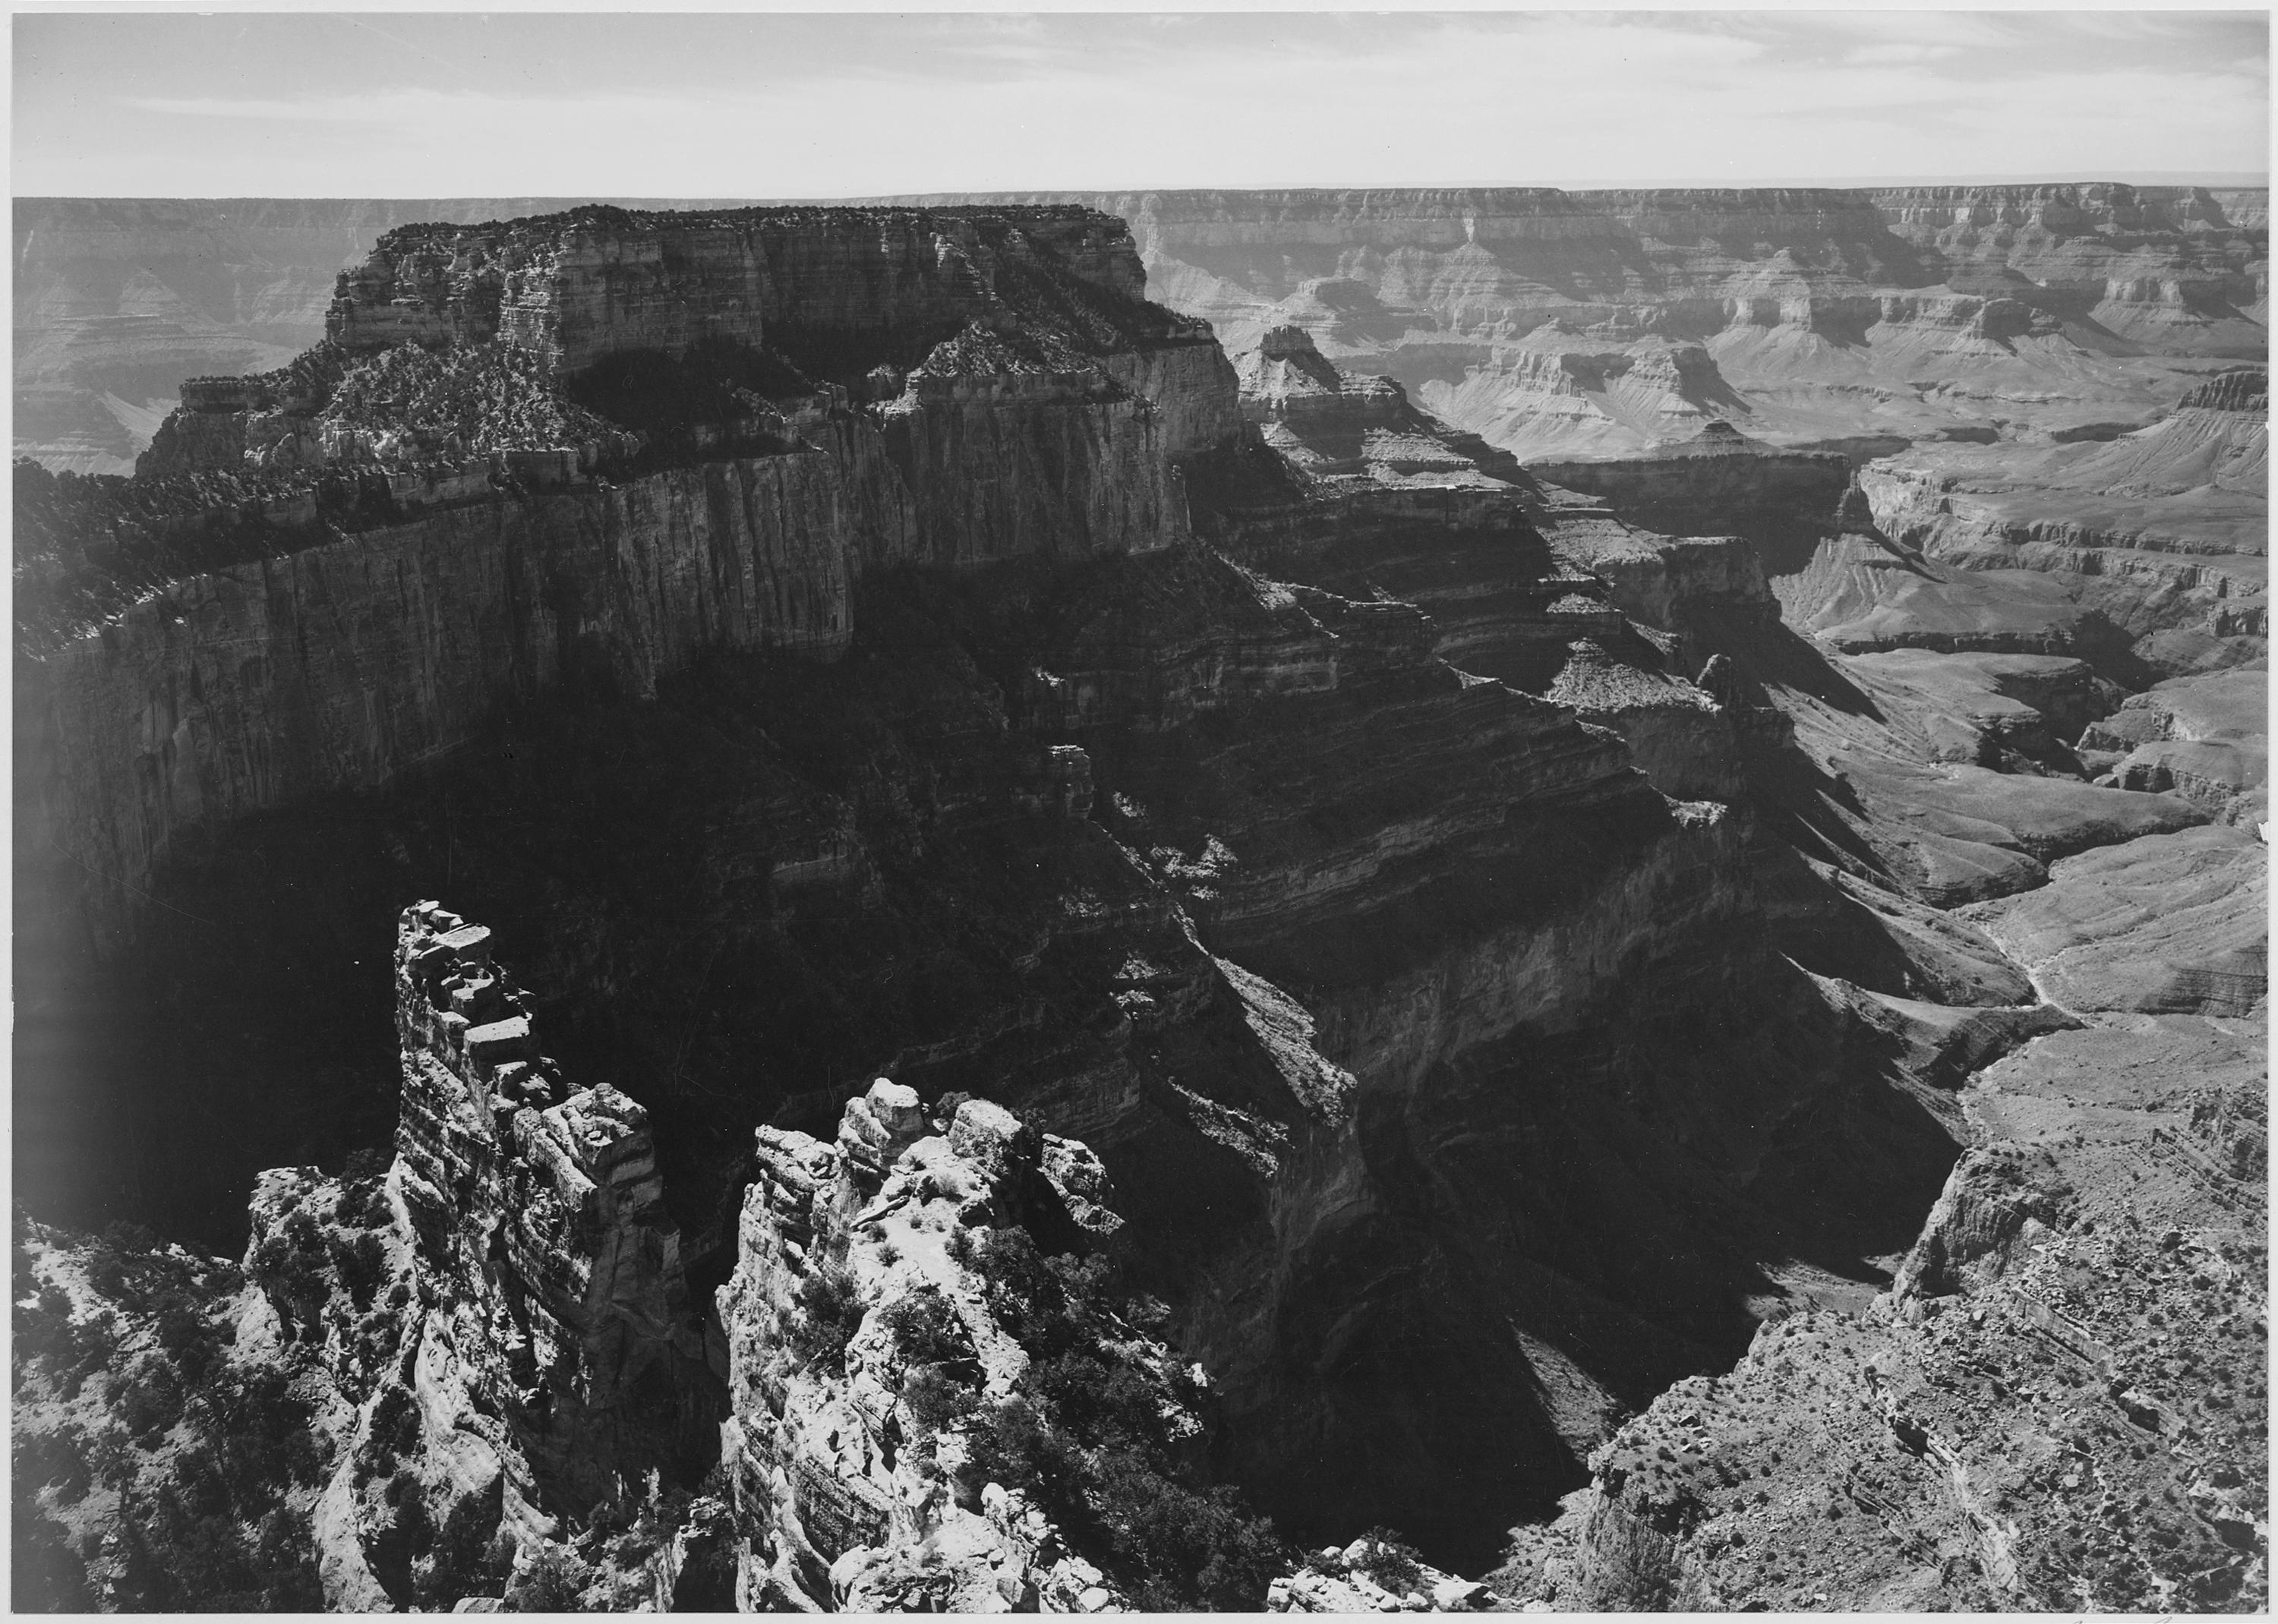 Ansel Adams - National Archives 79-AA-F04